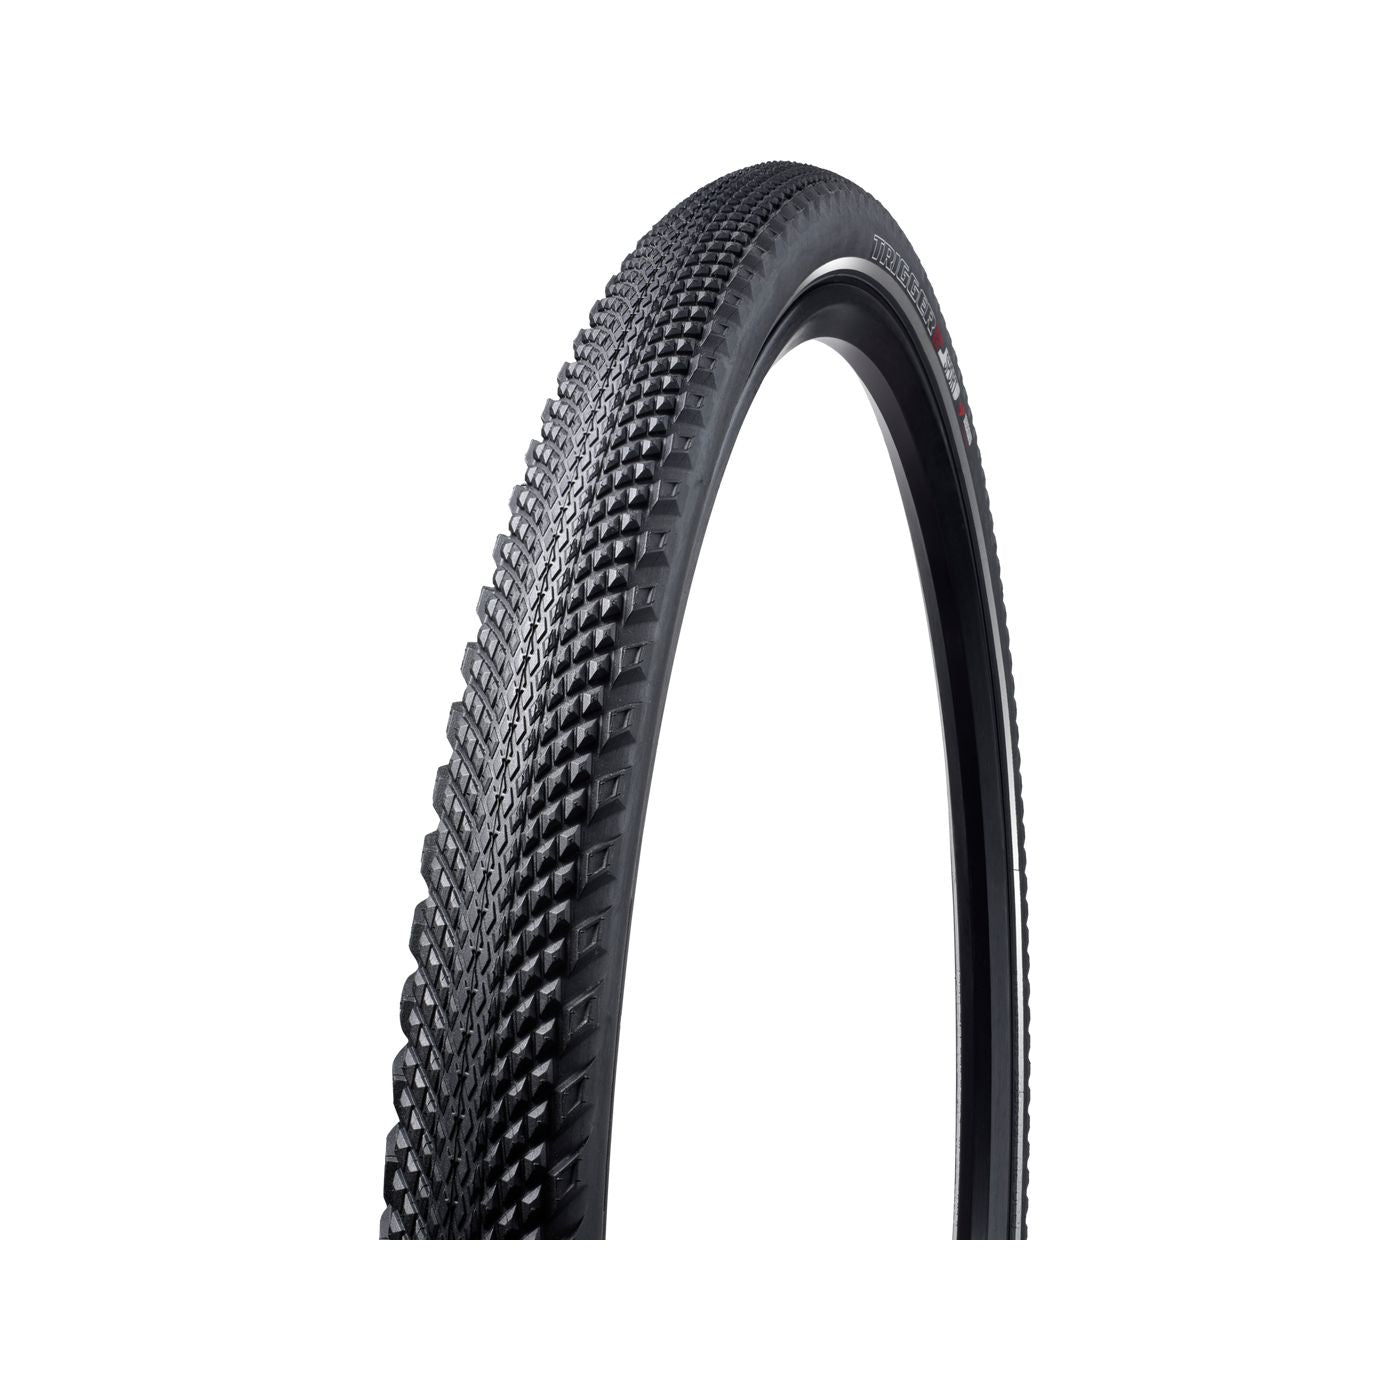 Specialized Trigger Sport 700c Bike Tire - Tires - Bicycle Warehouse